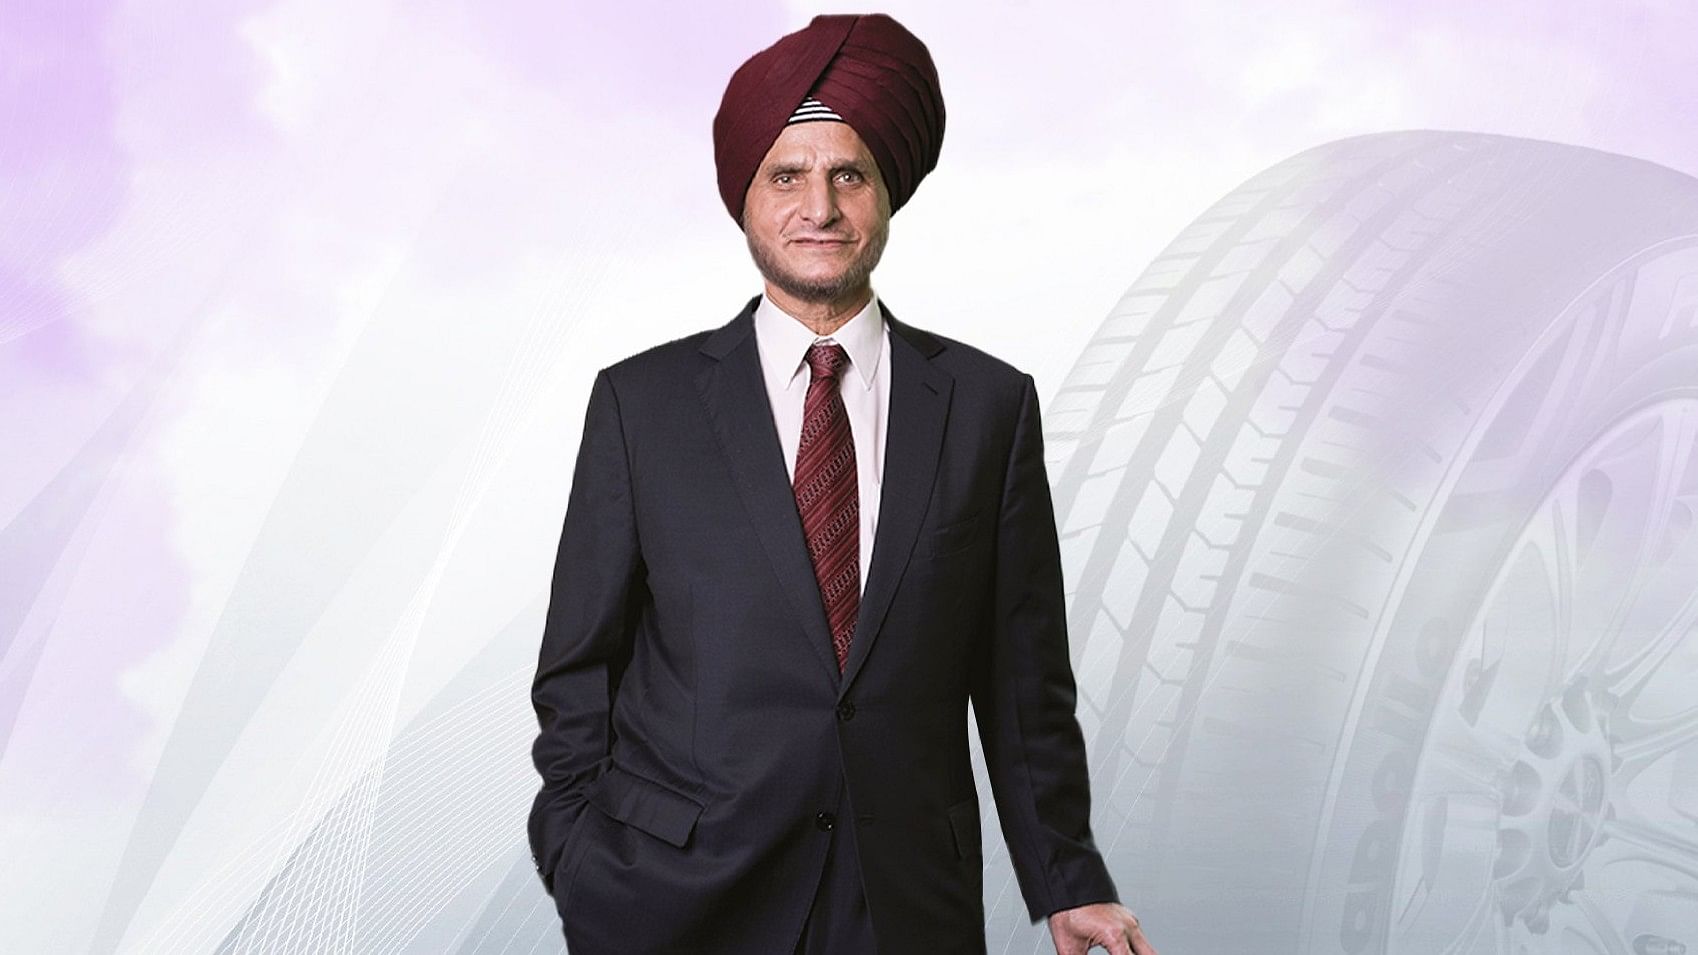 Former managing director of Apollo Tyres Onkar Kanwar has a net worth of $1.5 billion and features on  Forbes World's Billionaires List.